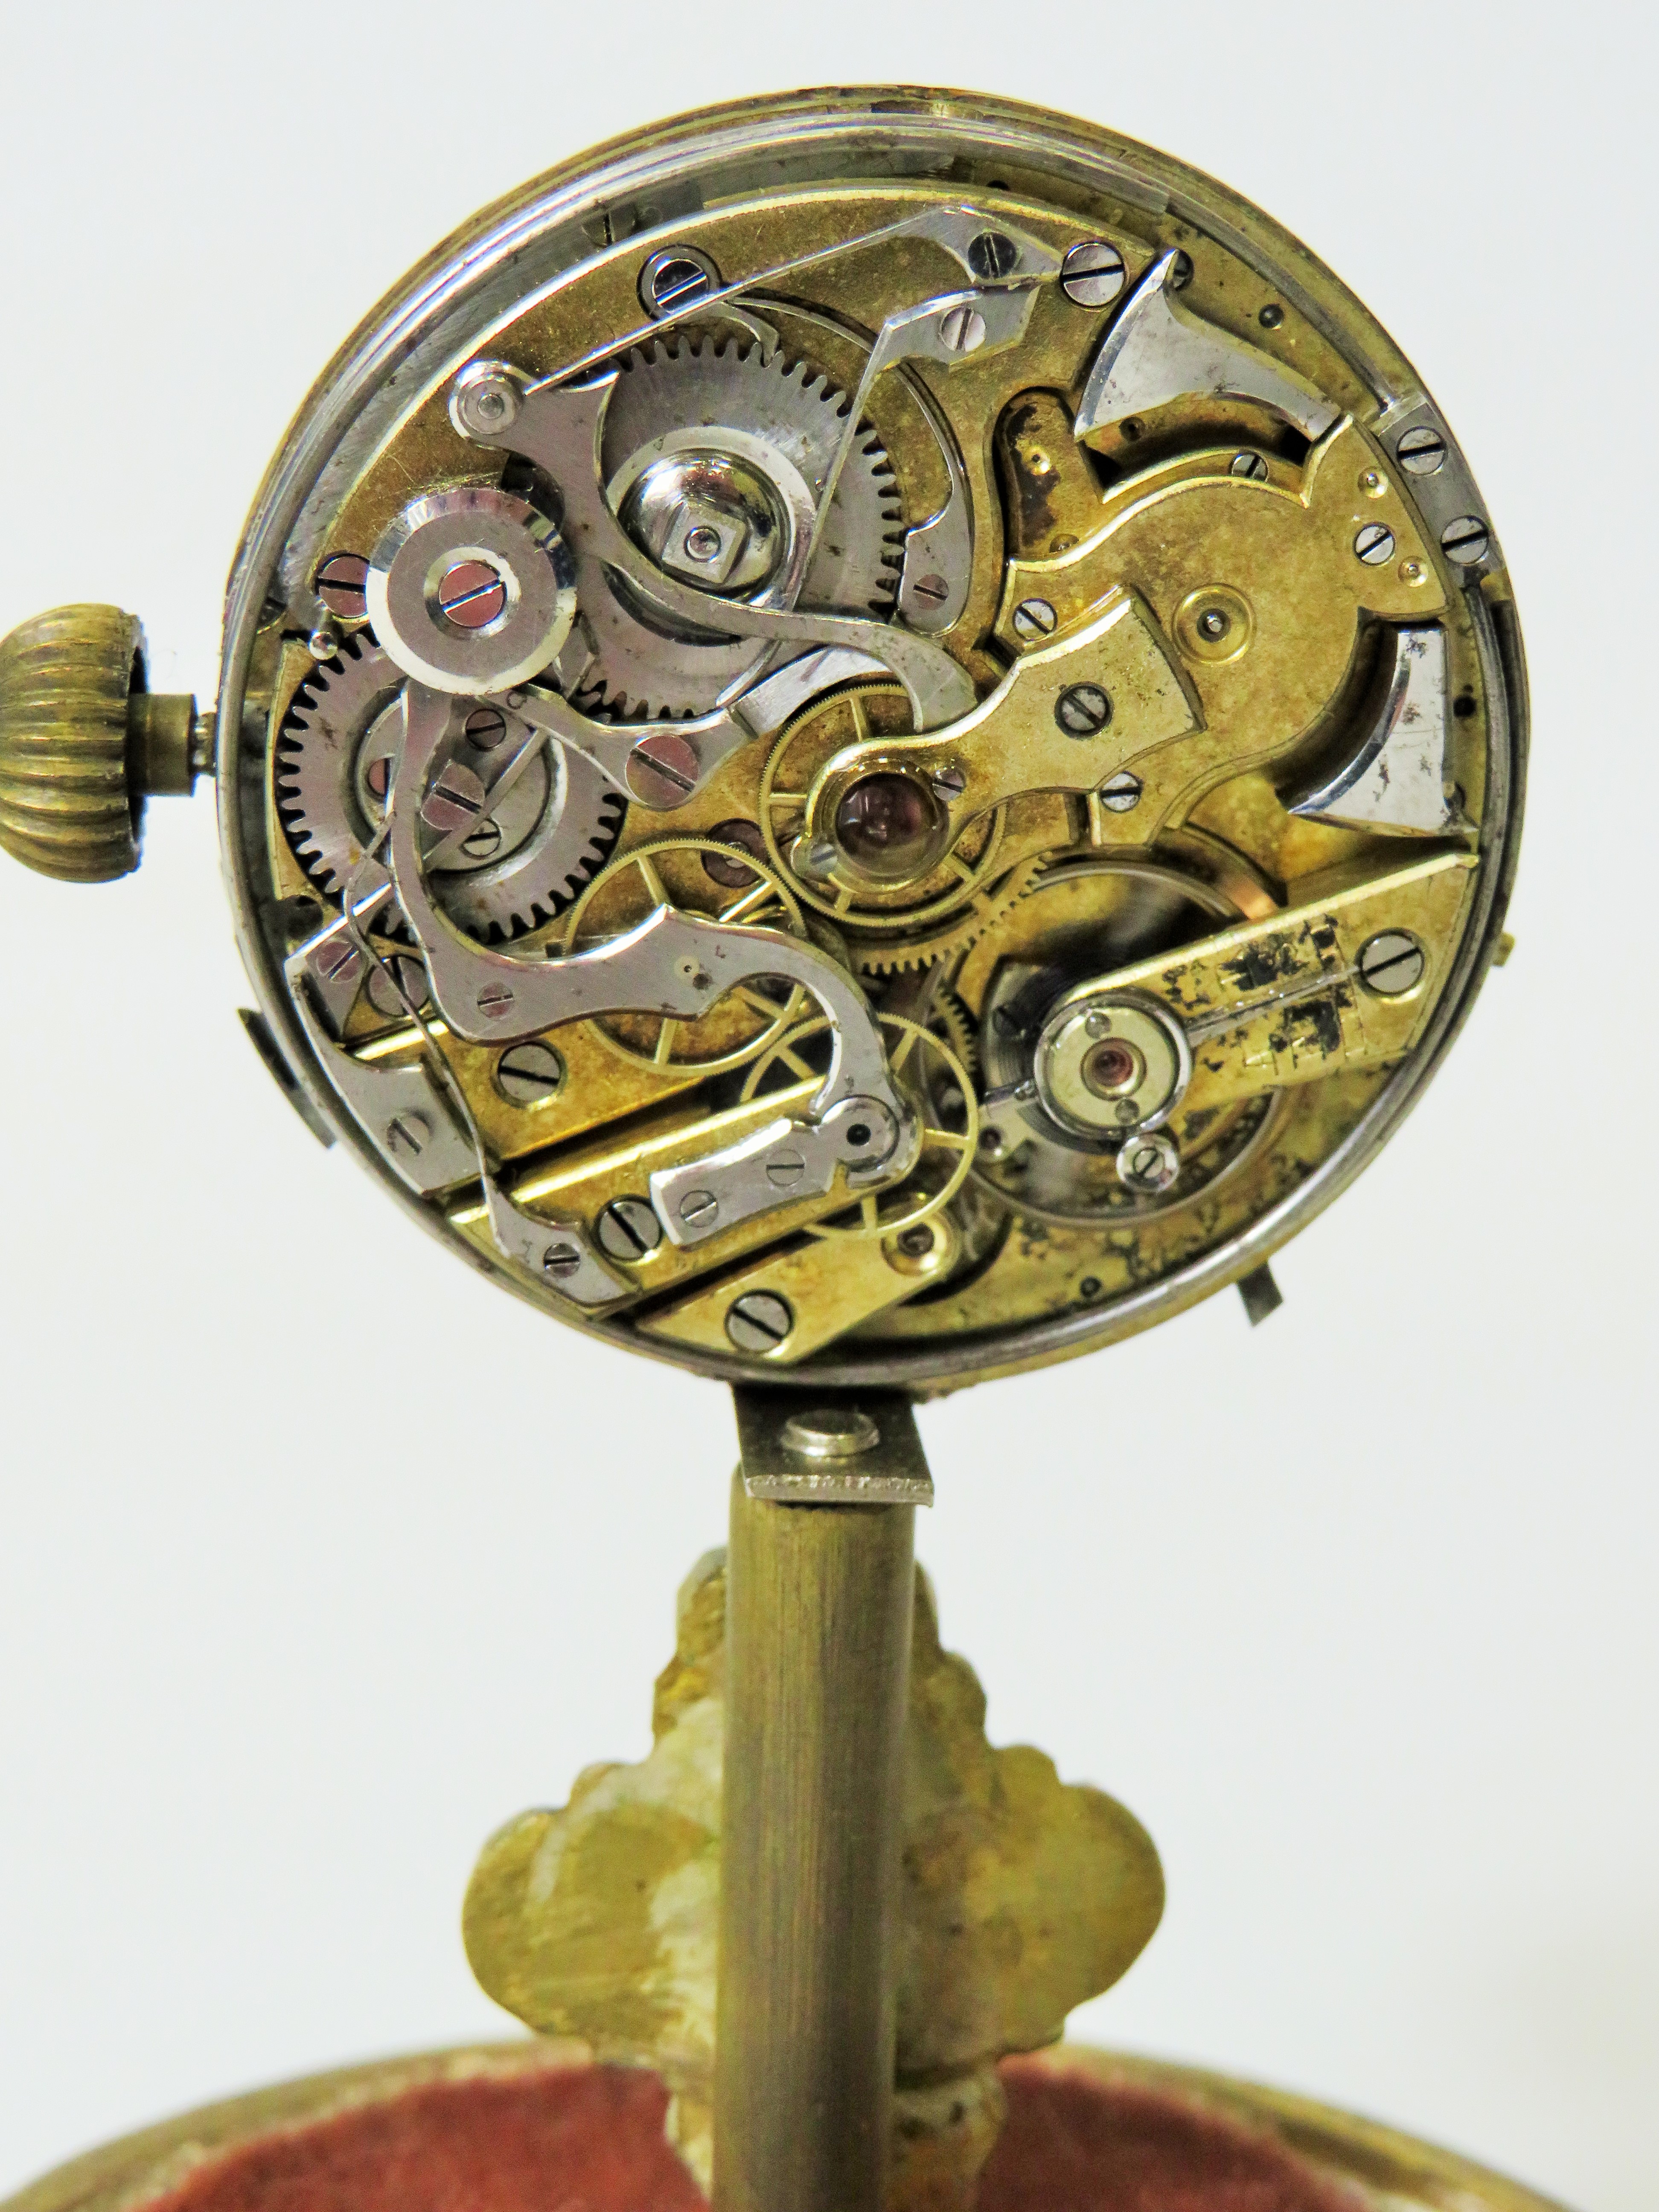 Unusual enamel faced Pocket watch which has been mounted on a brass and wooden stand and under a gla - Image 4 of 4